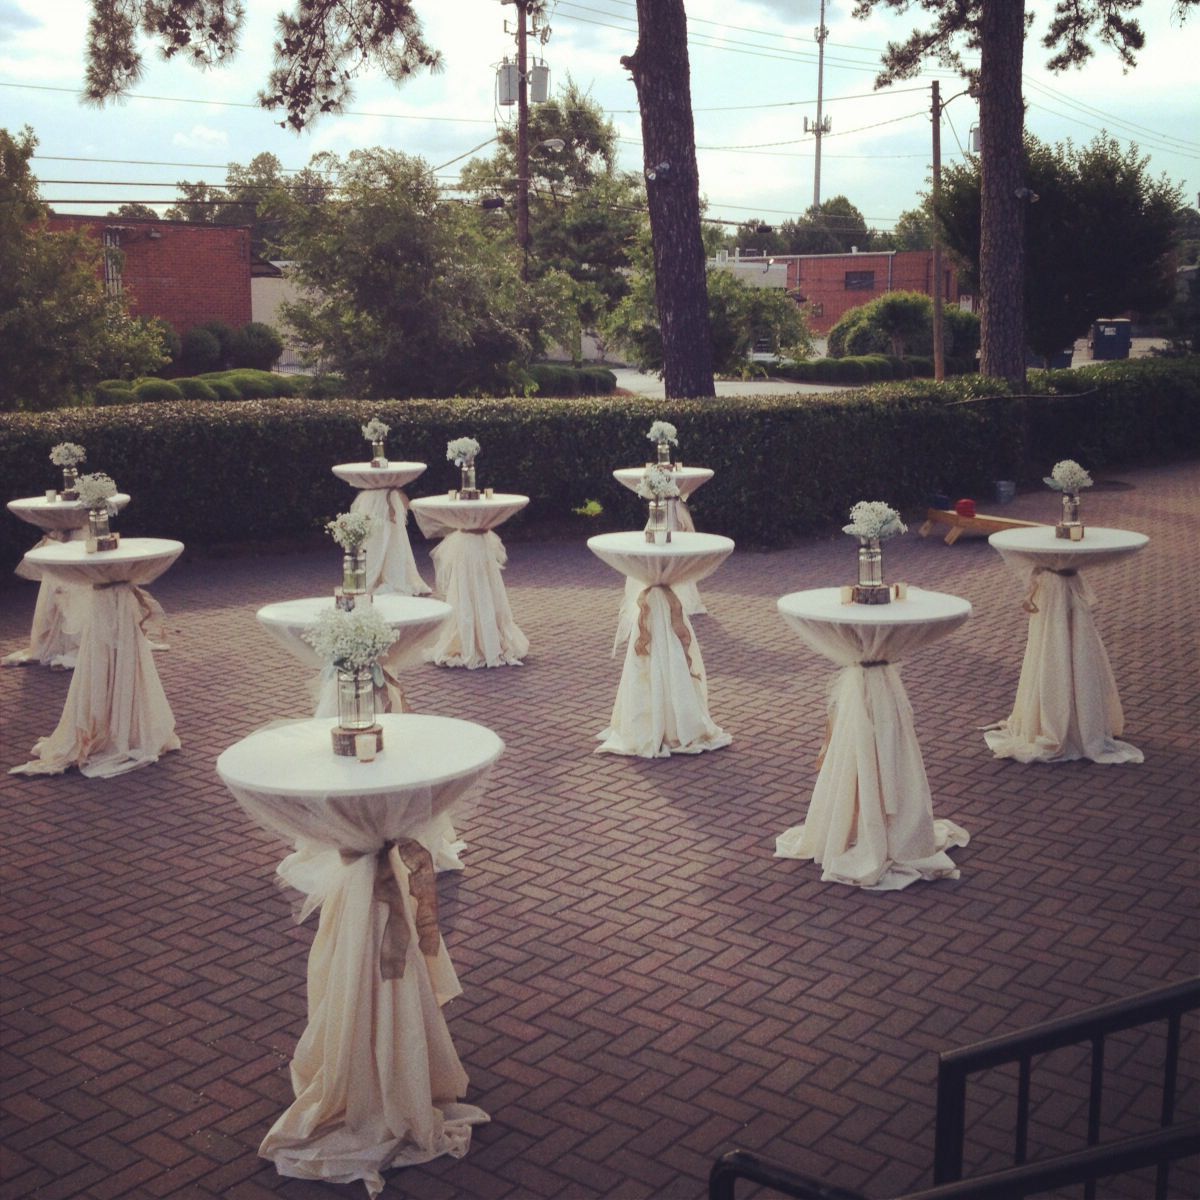 Outdoor Cocktail Tables With Tulle Overlays, Burlap Ties And Baby's Regarding Natural Outdoor Cocktail Tables (Gallery 15 of 20)